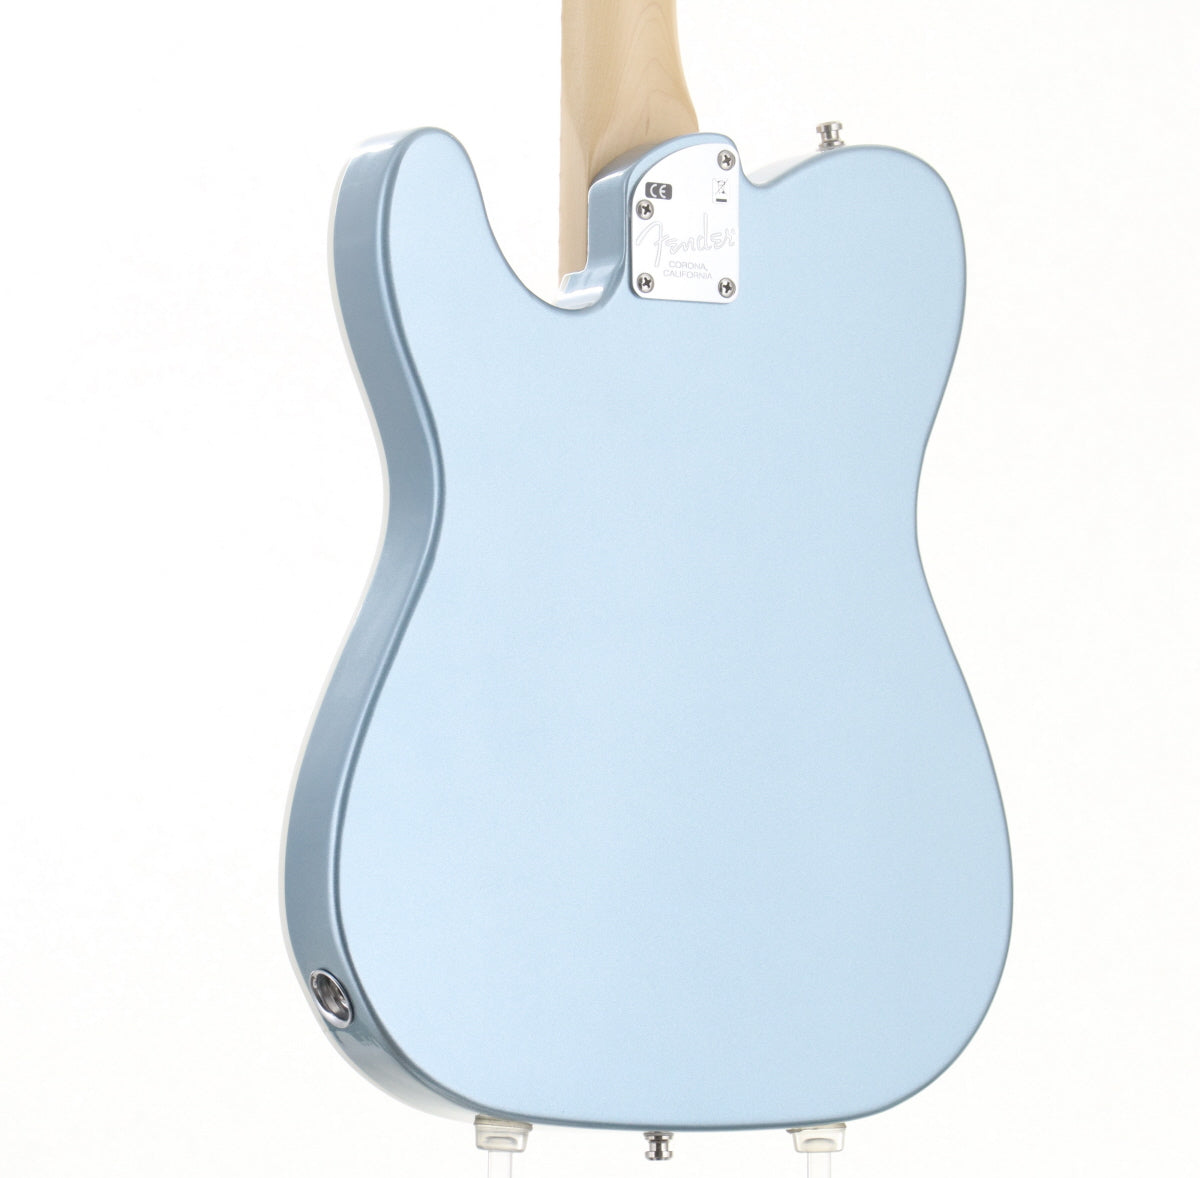 [SN US15064344] USED FENDER USA / American Elite Telecaster Thinline Maple Fingerboard Mystic Blue Ice [03]